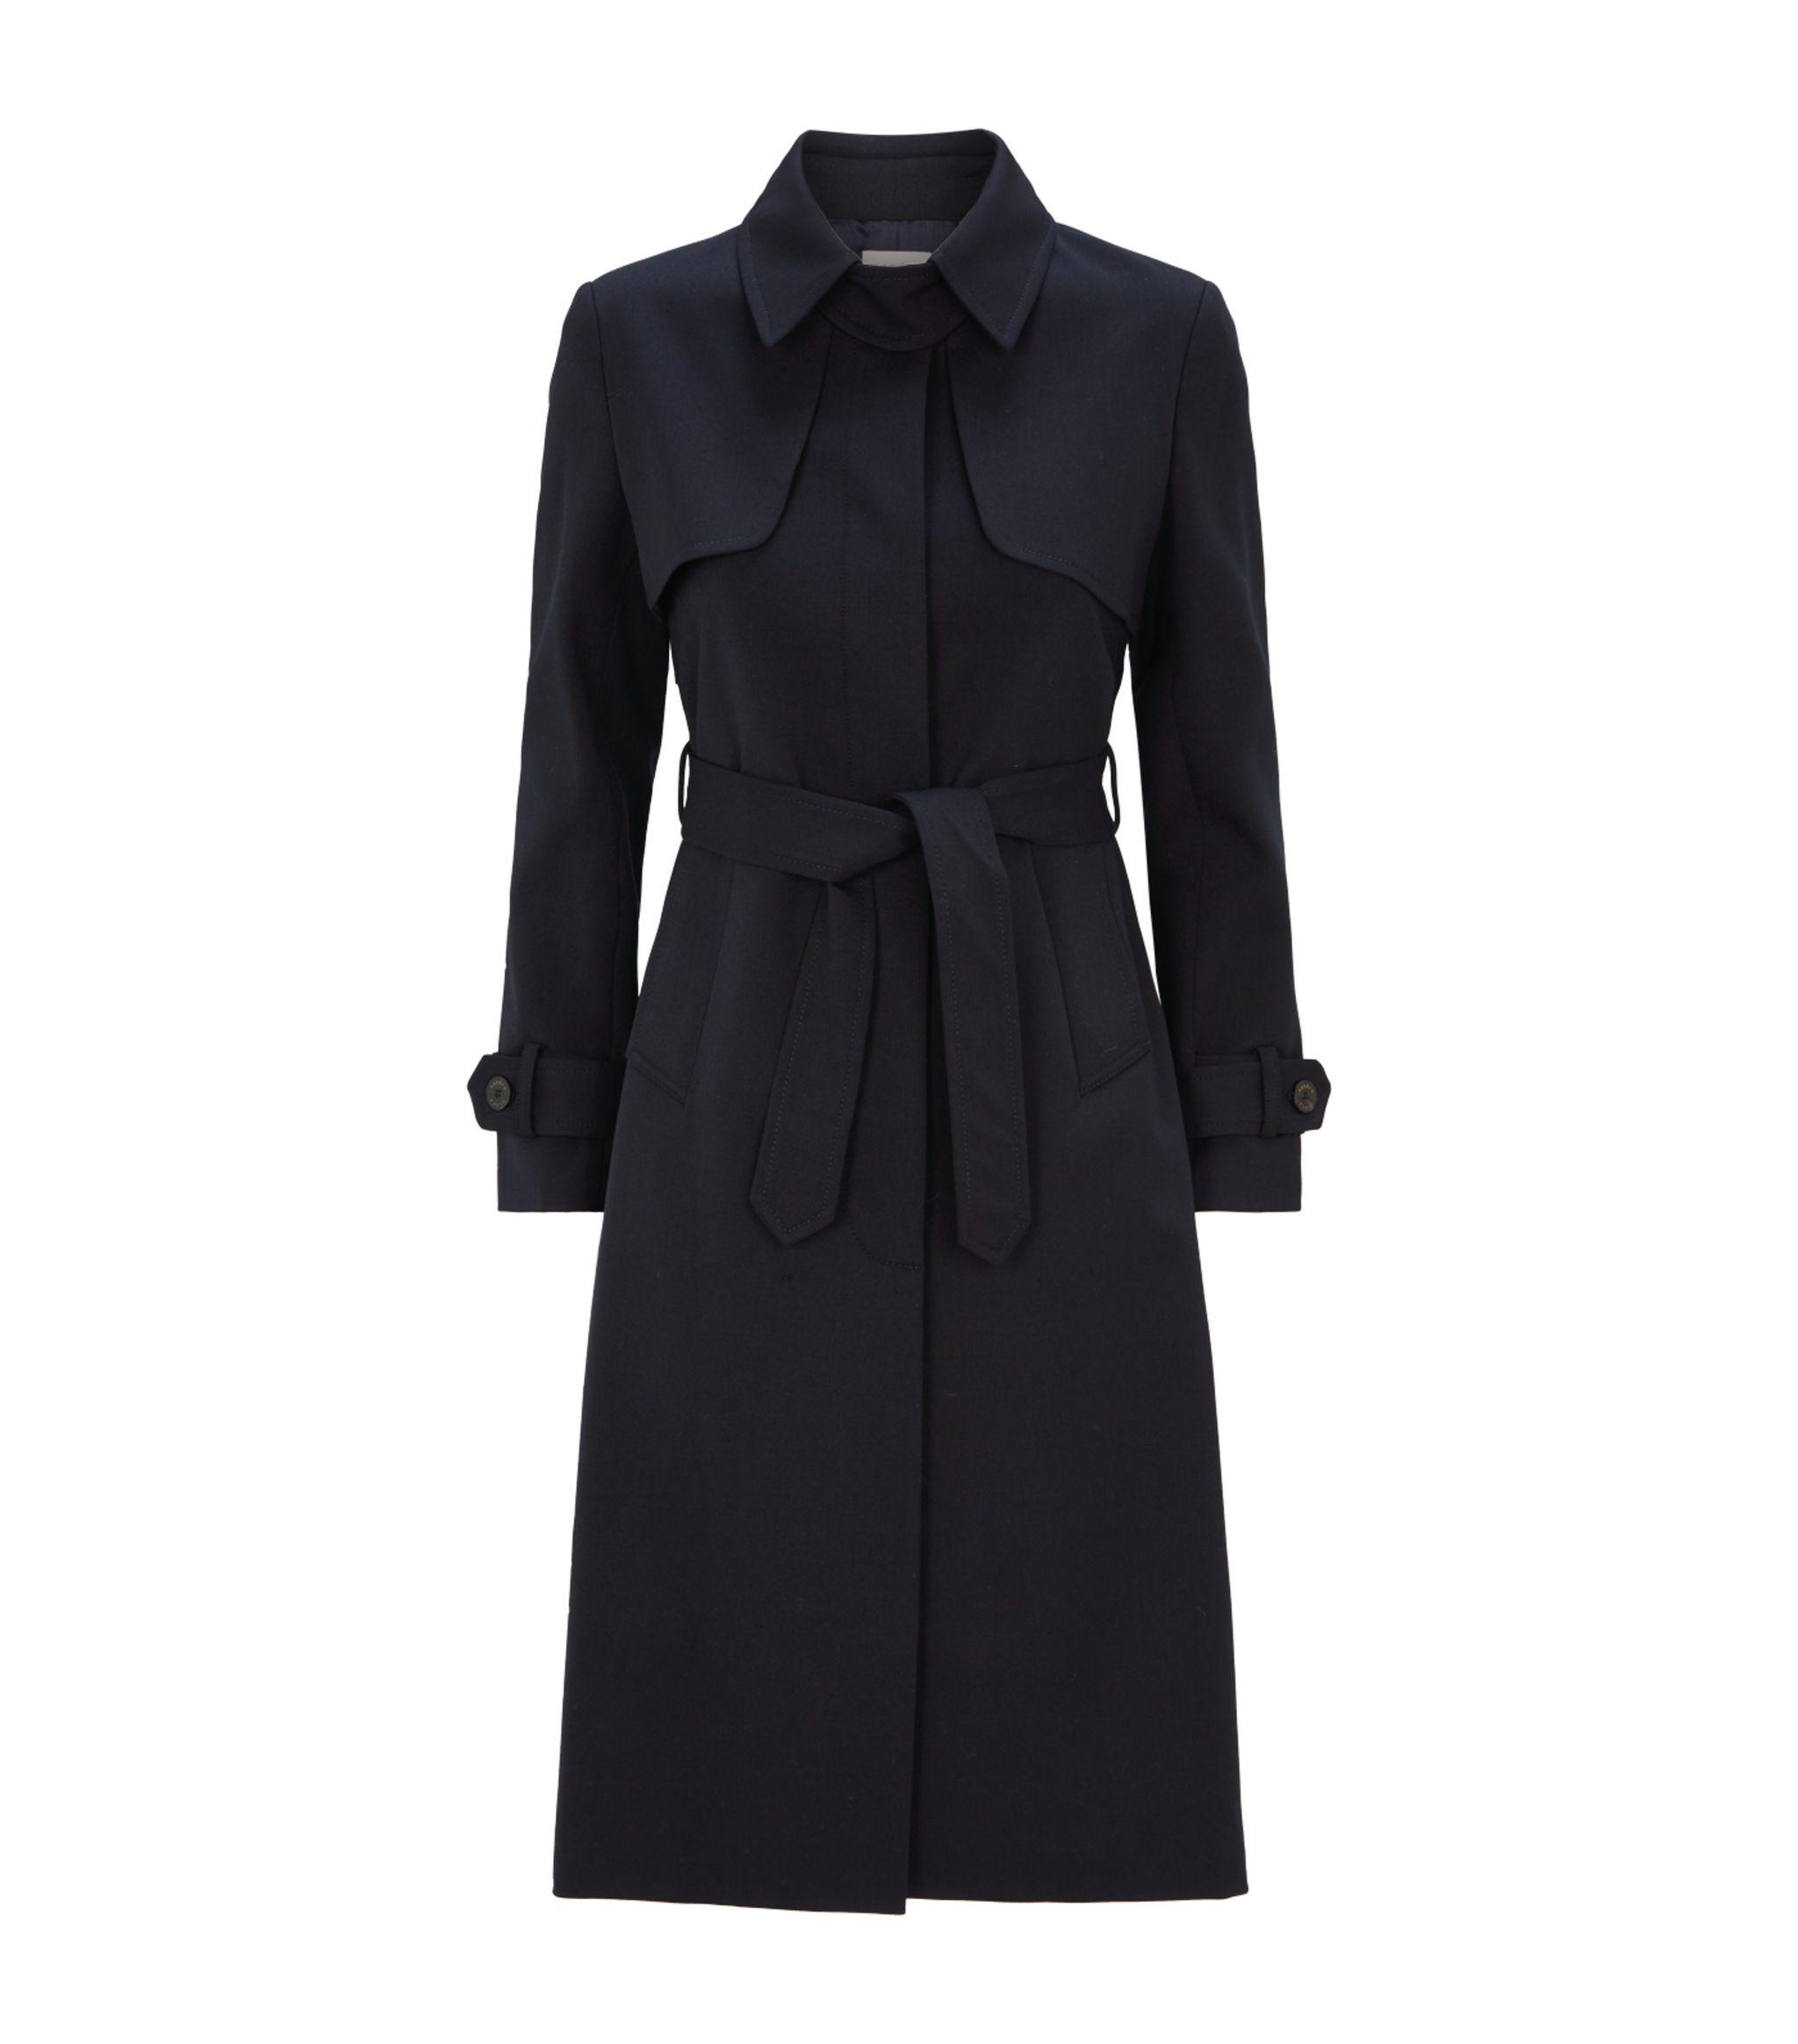 Sandro Synthetic Longline Trench Coat in Black - Lyst